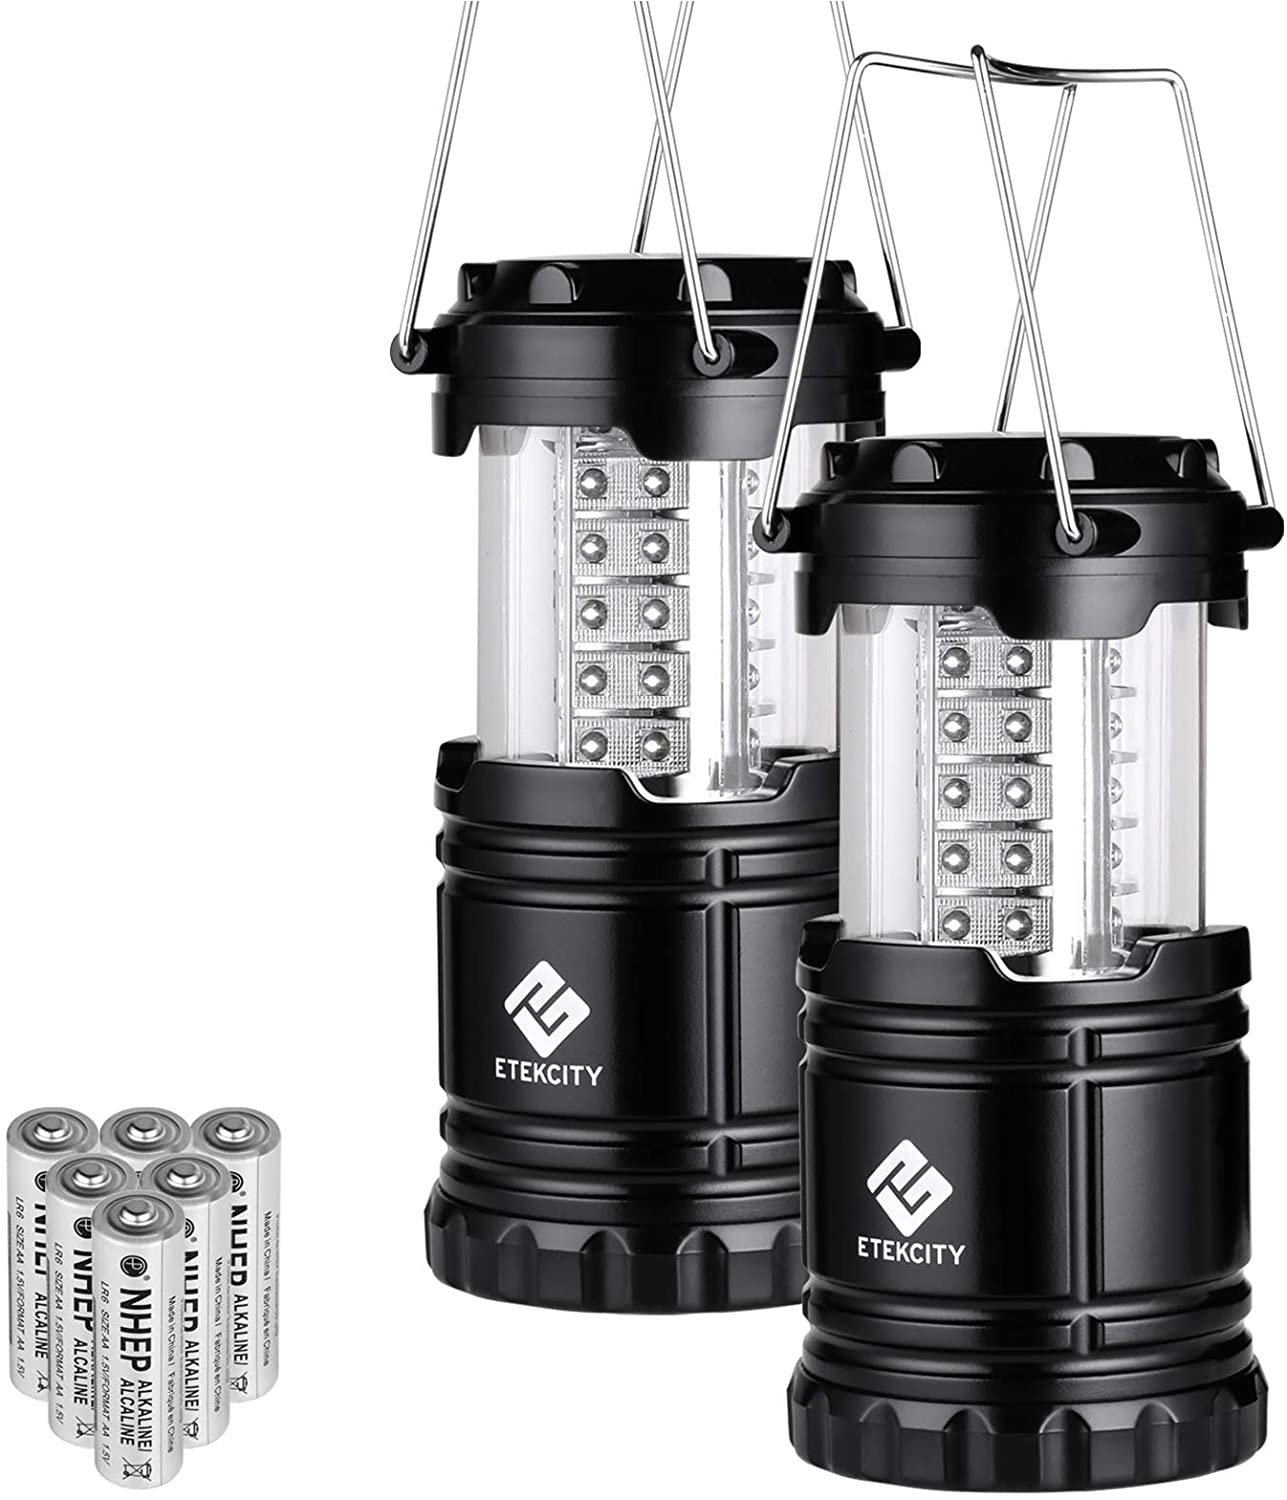 Two of the Etekcity Lanterns with a pack of batteries next to them